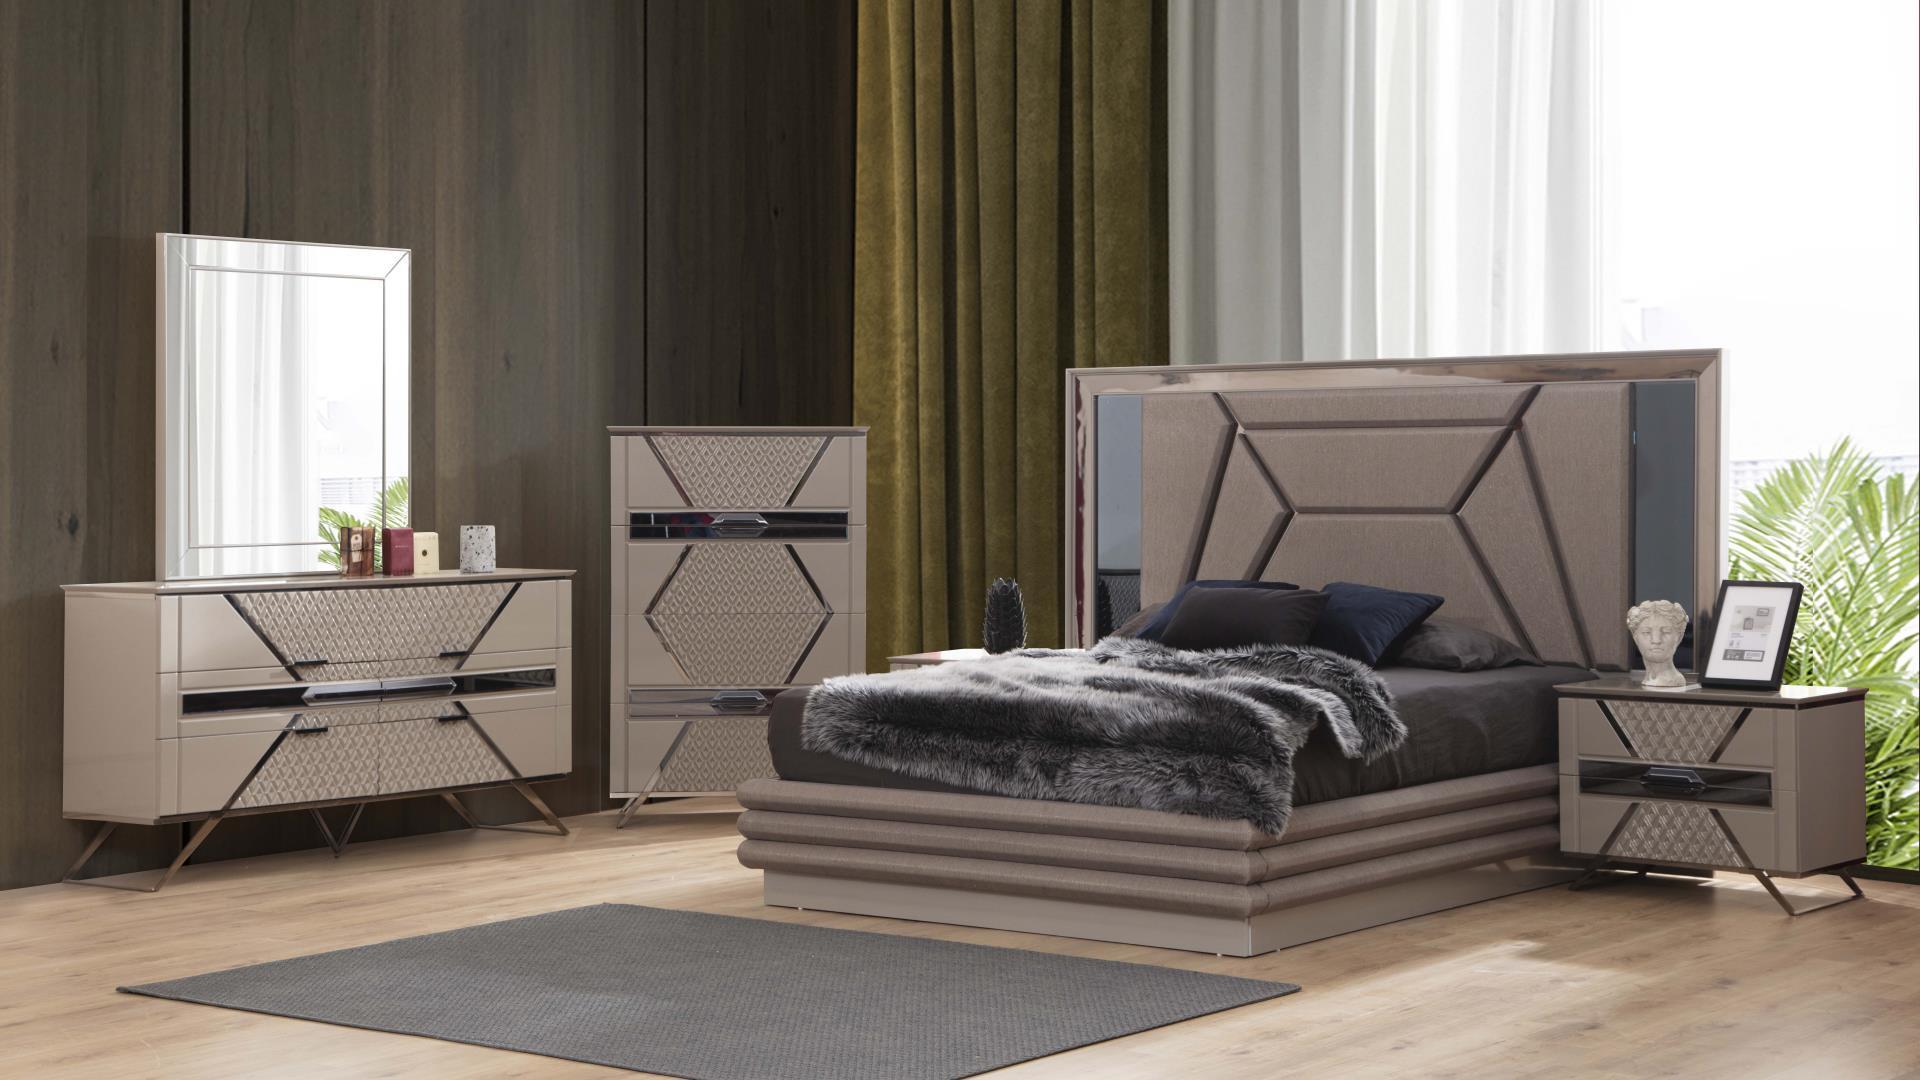 Contemporary, Modern Platform Bedroom Set WENDY WENDY-Q-NDM-4PC in Taupe Fabric